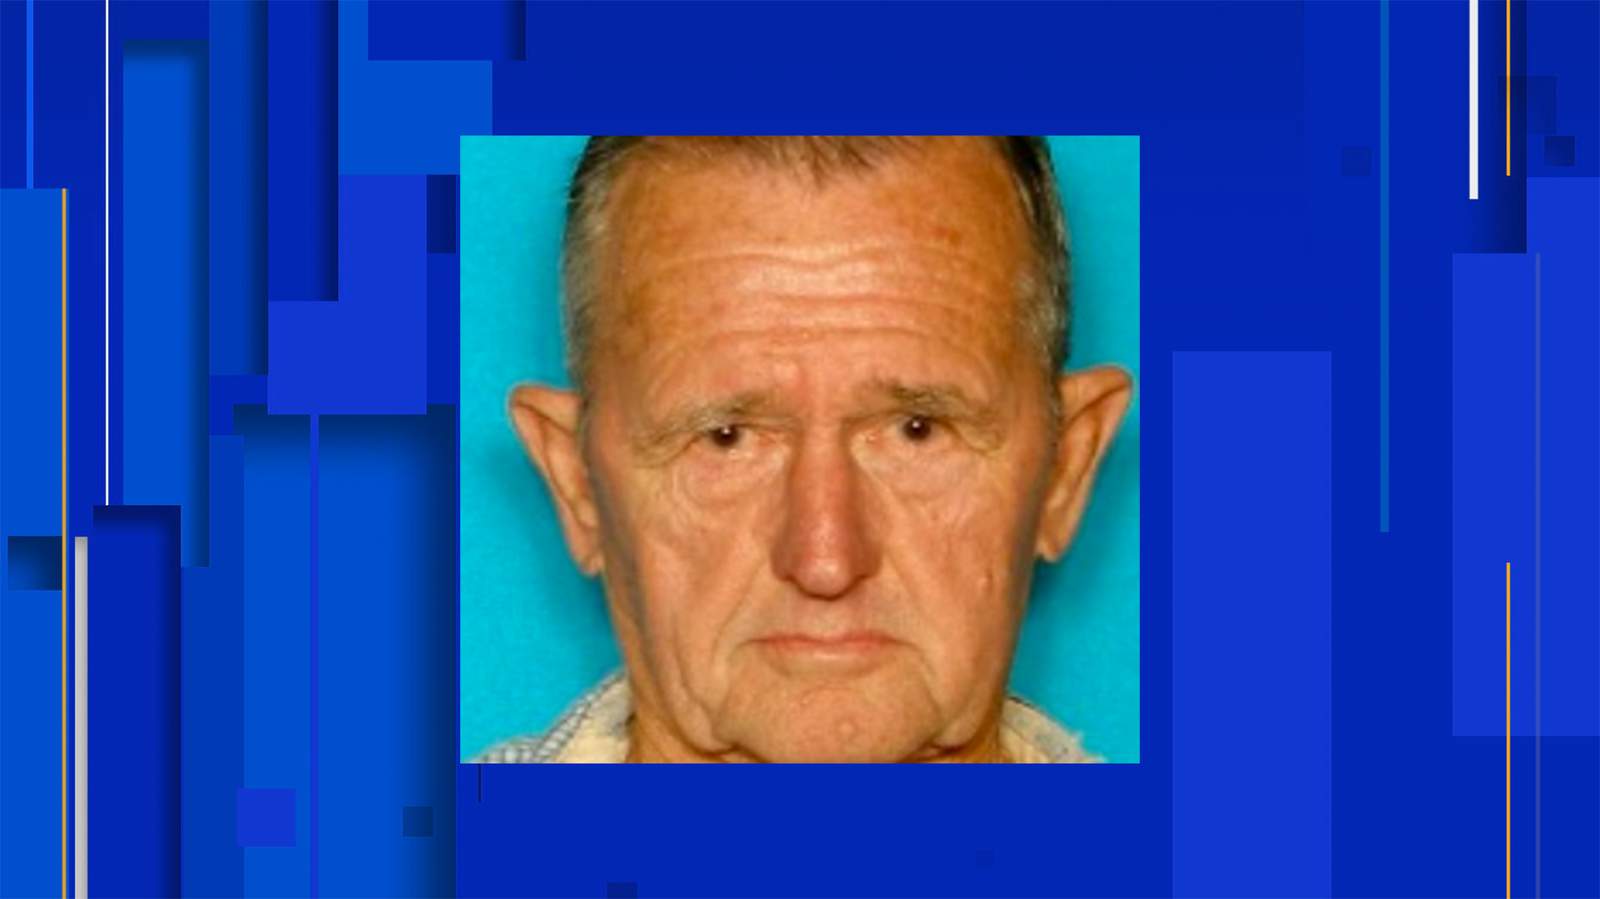 Have you seen this man? Officials say he was last seen in Mathis